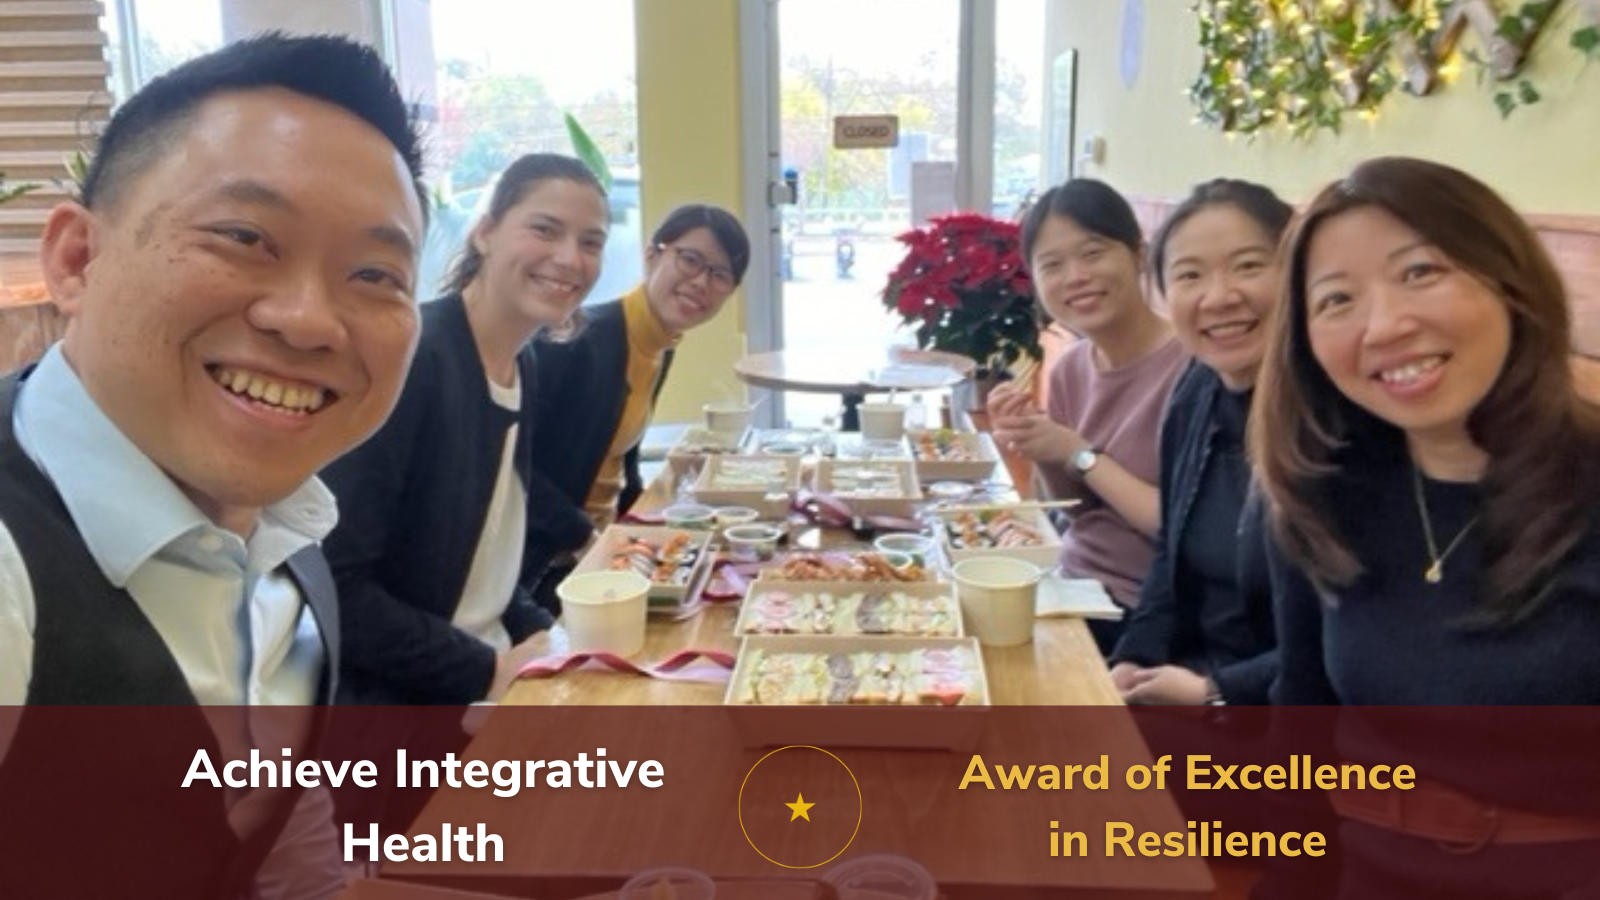 Achieve Integrative Health team smile for a photo at lunch